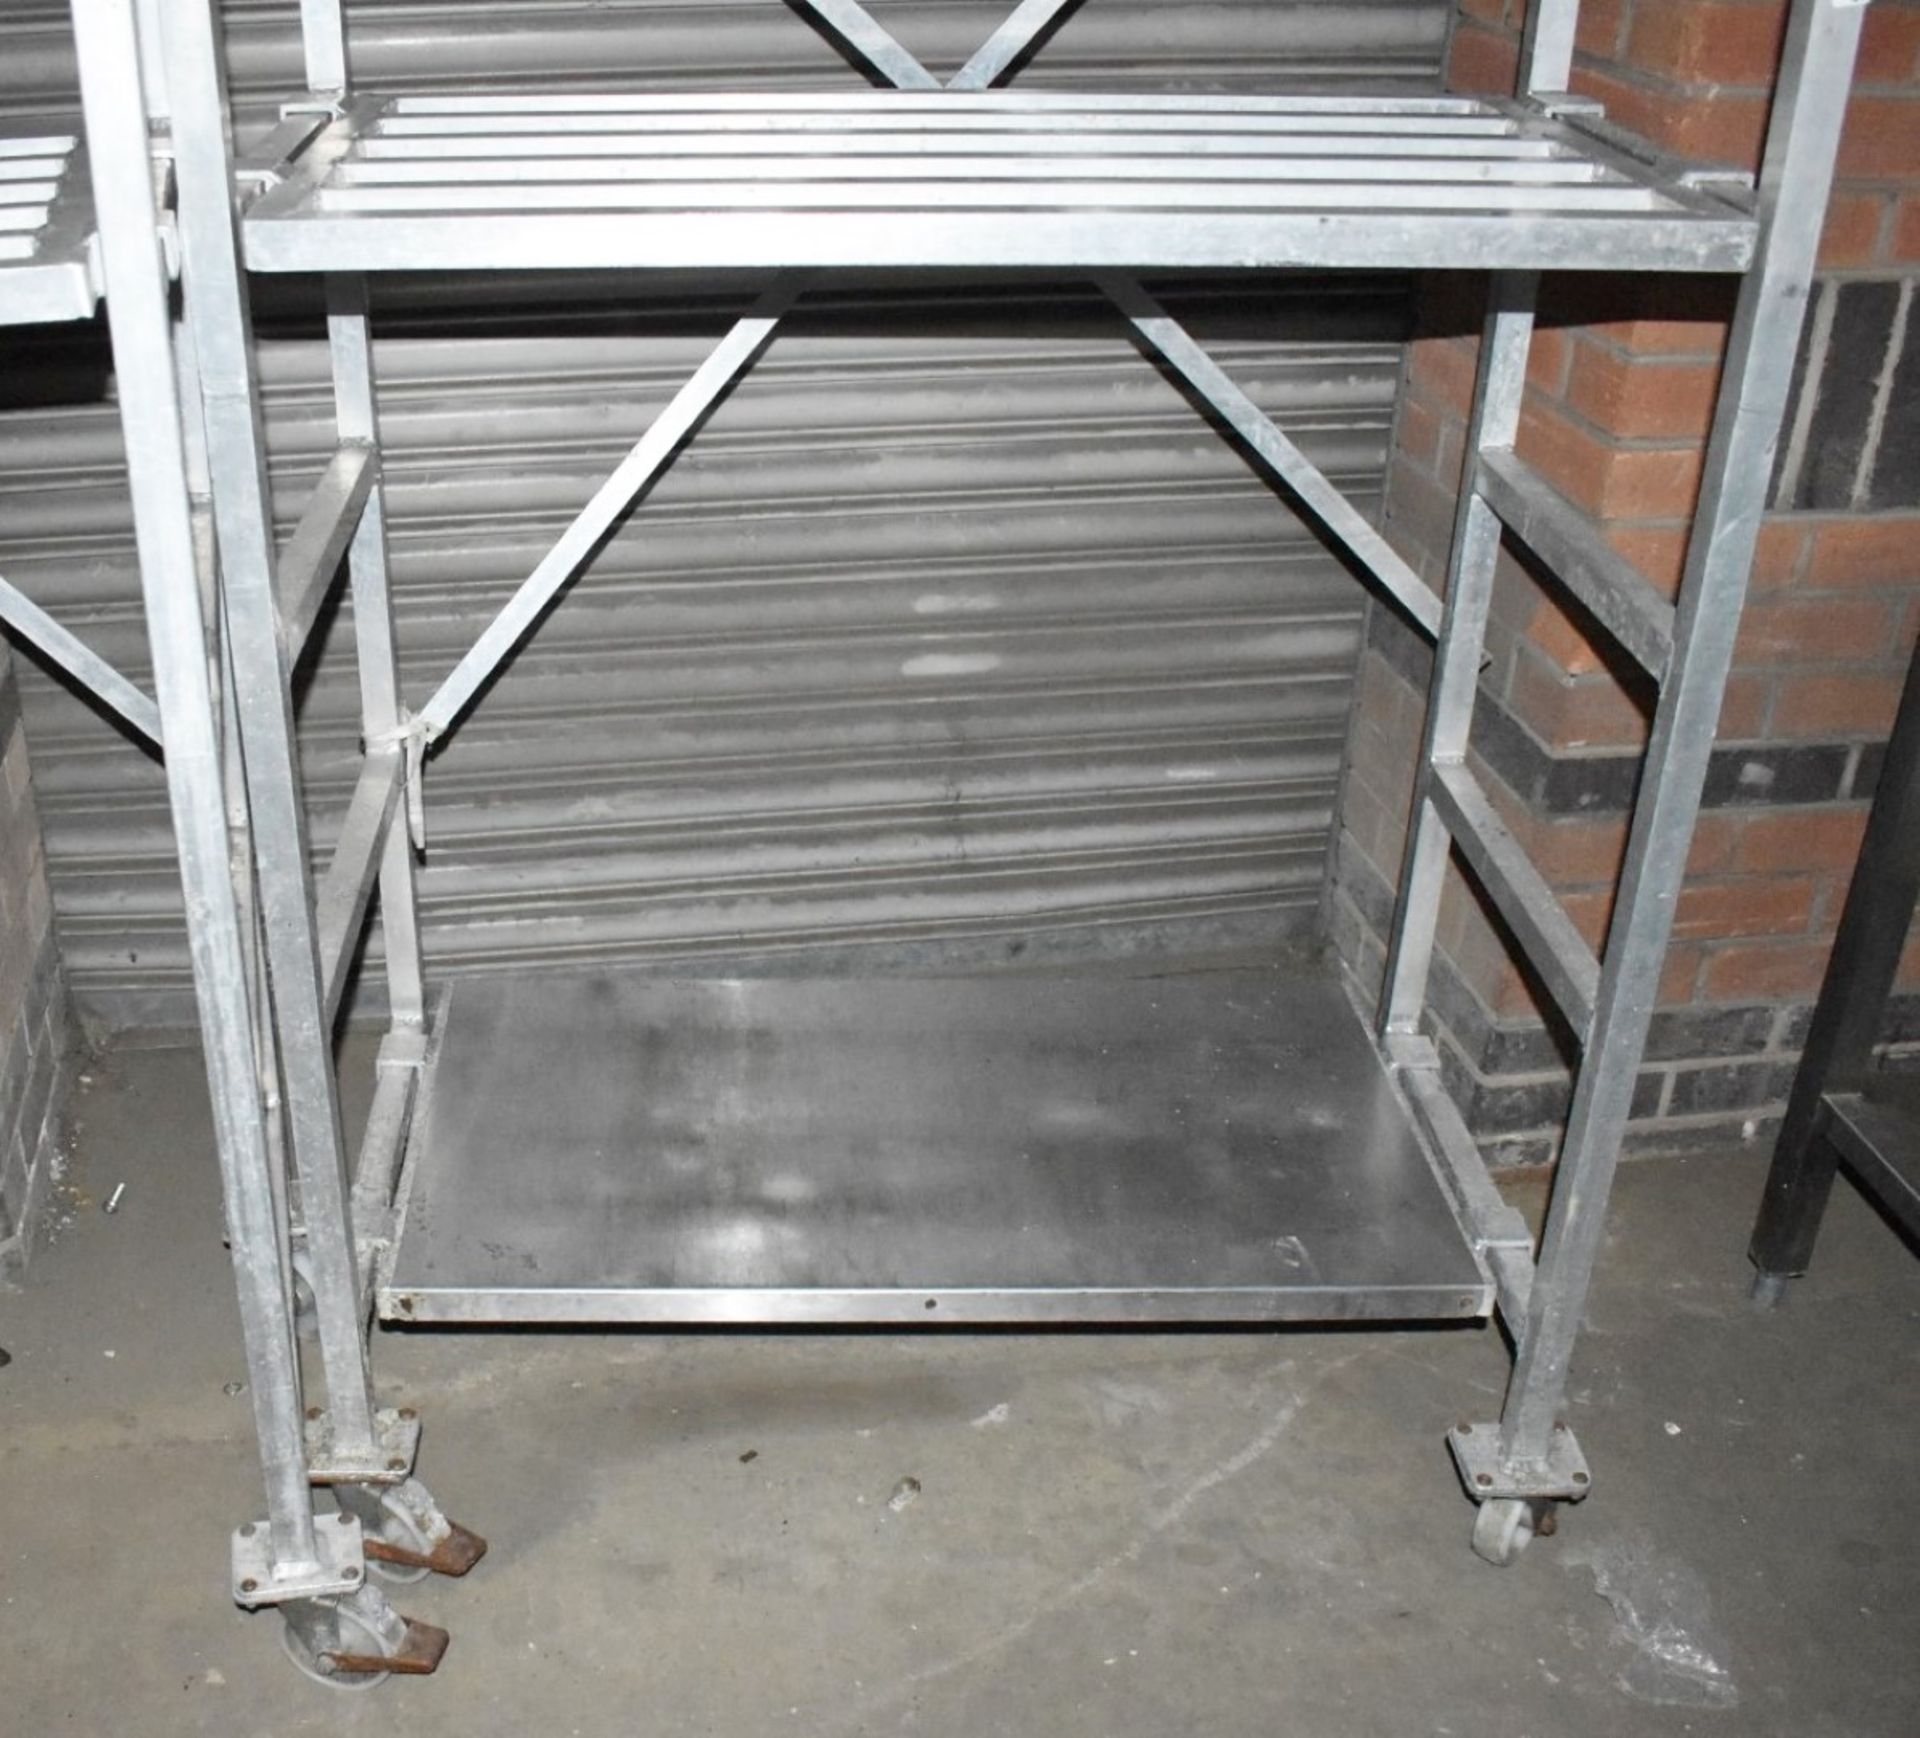 4 x Commercial Kitchen Storage Shelves With Removable Adjustable Shelf Panels - Dimensions: See - Image 3 of 15